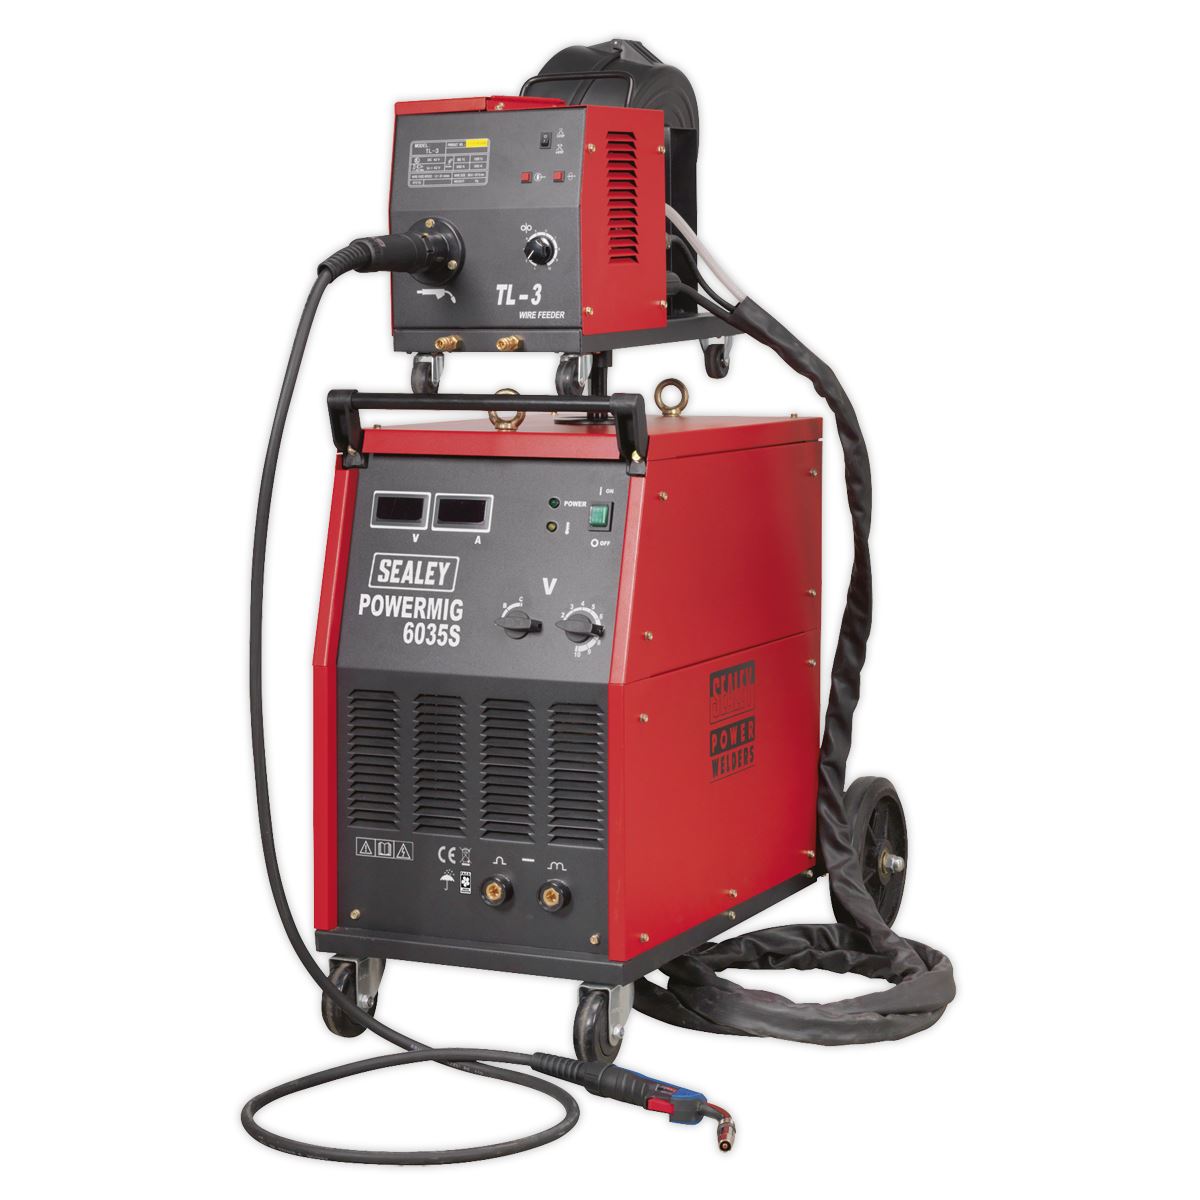 Sealey Professional MIG Welder 350A 415V 3ph with Binzel® Euro Torch & Portable Wire Drive